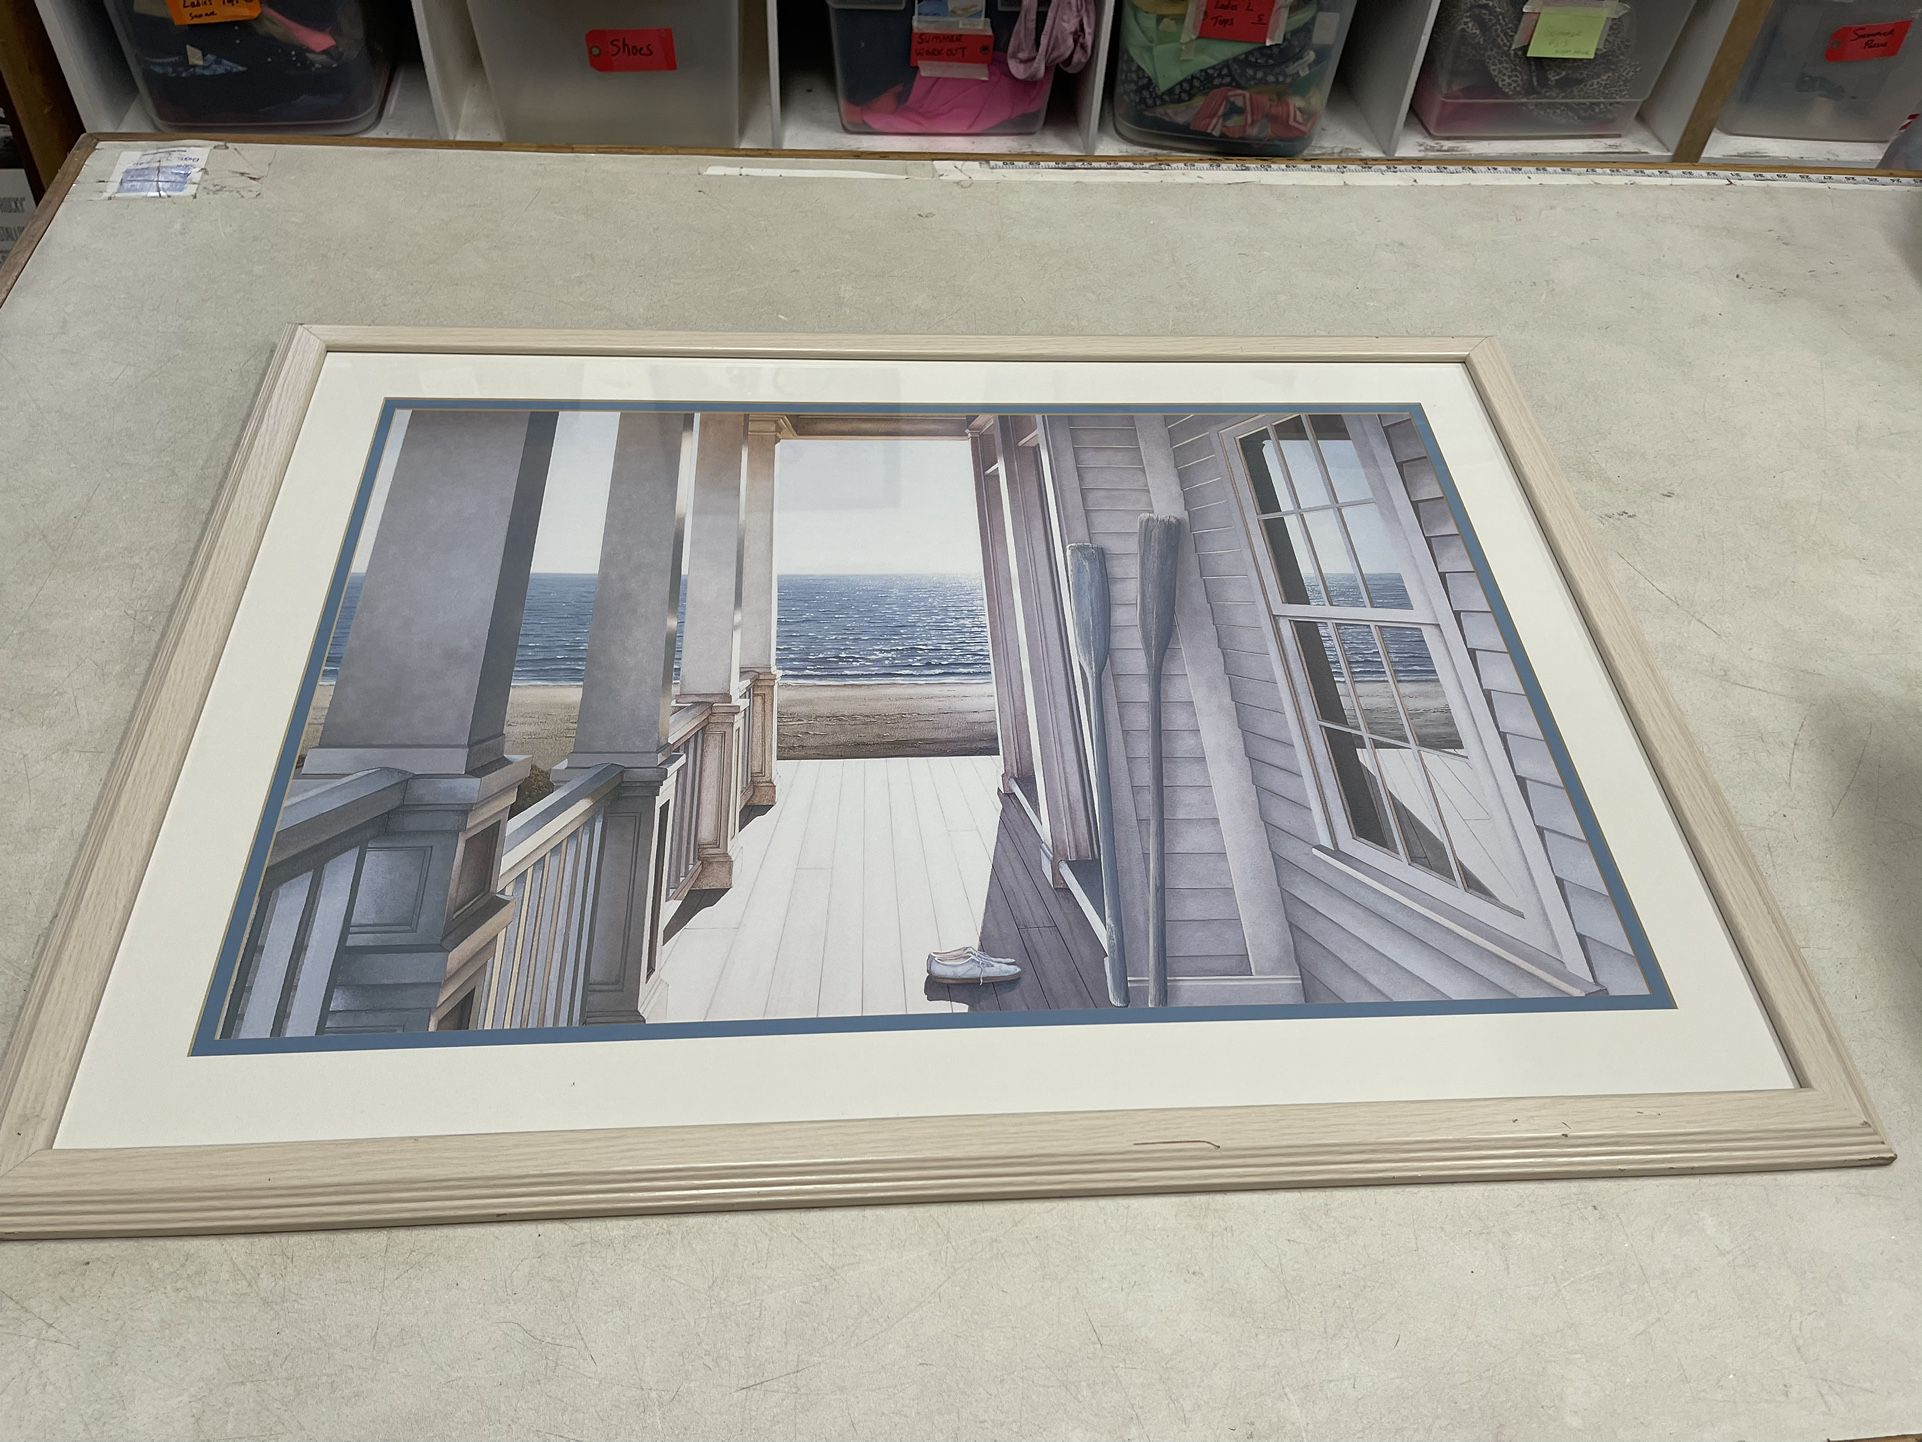 FRAMED Serenity by Daniel Pollera Art Poster Print Cottage Beach House Ocean Vacation